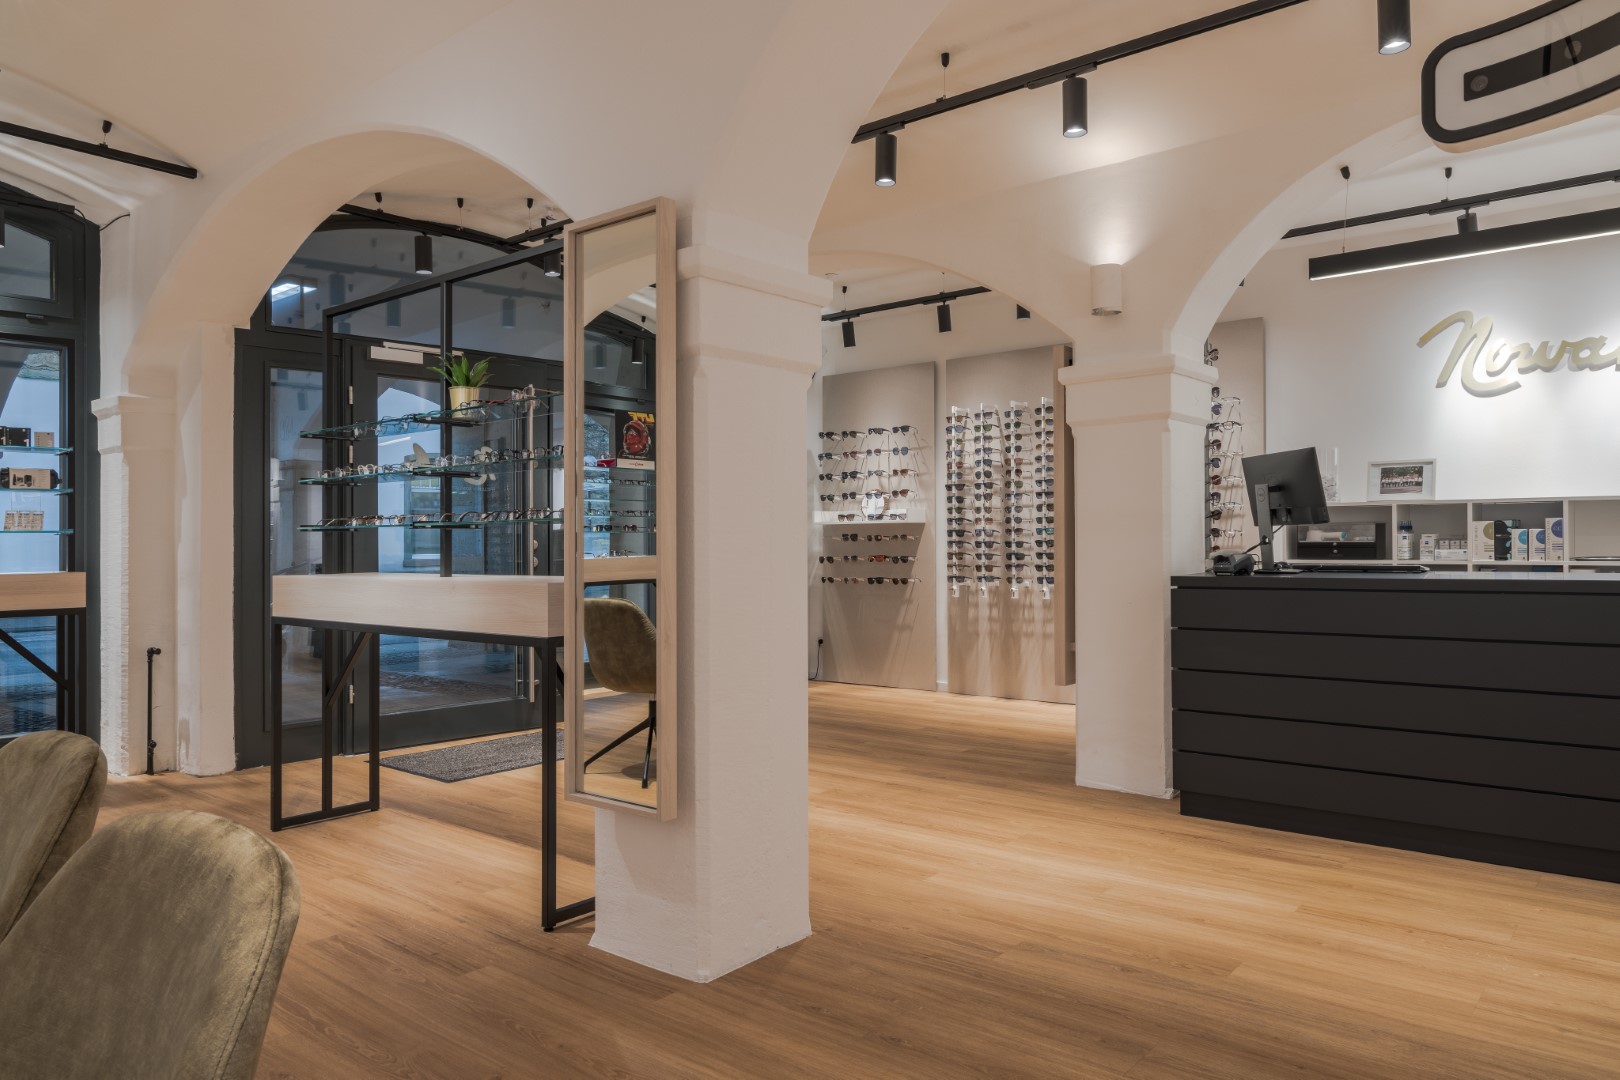 Optician and Audiology Design and furnishing by WSB interior construction